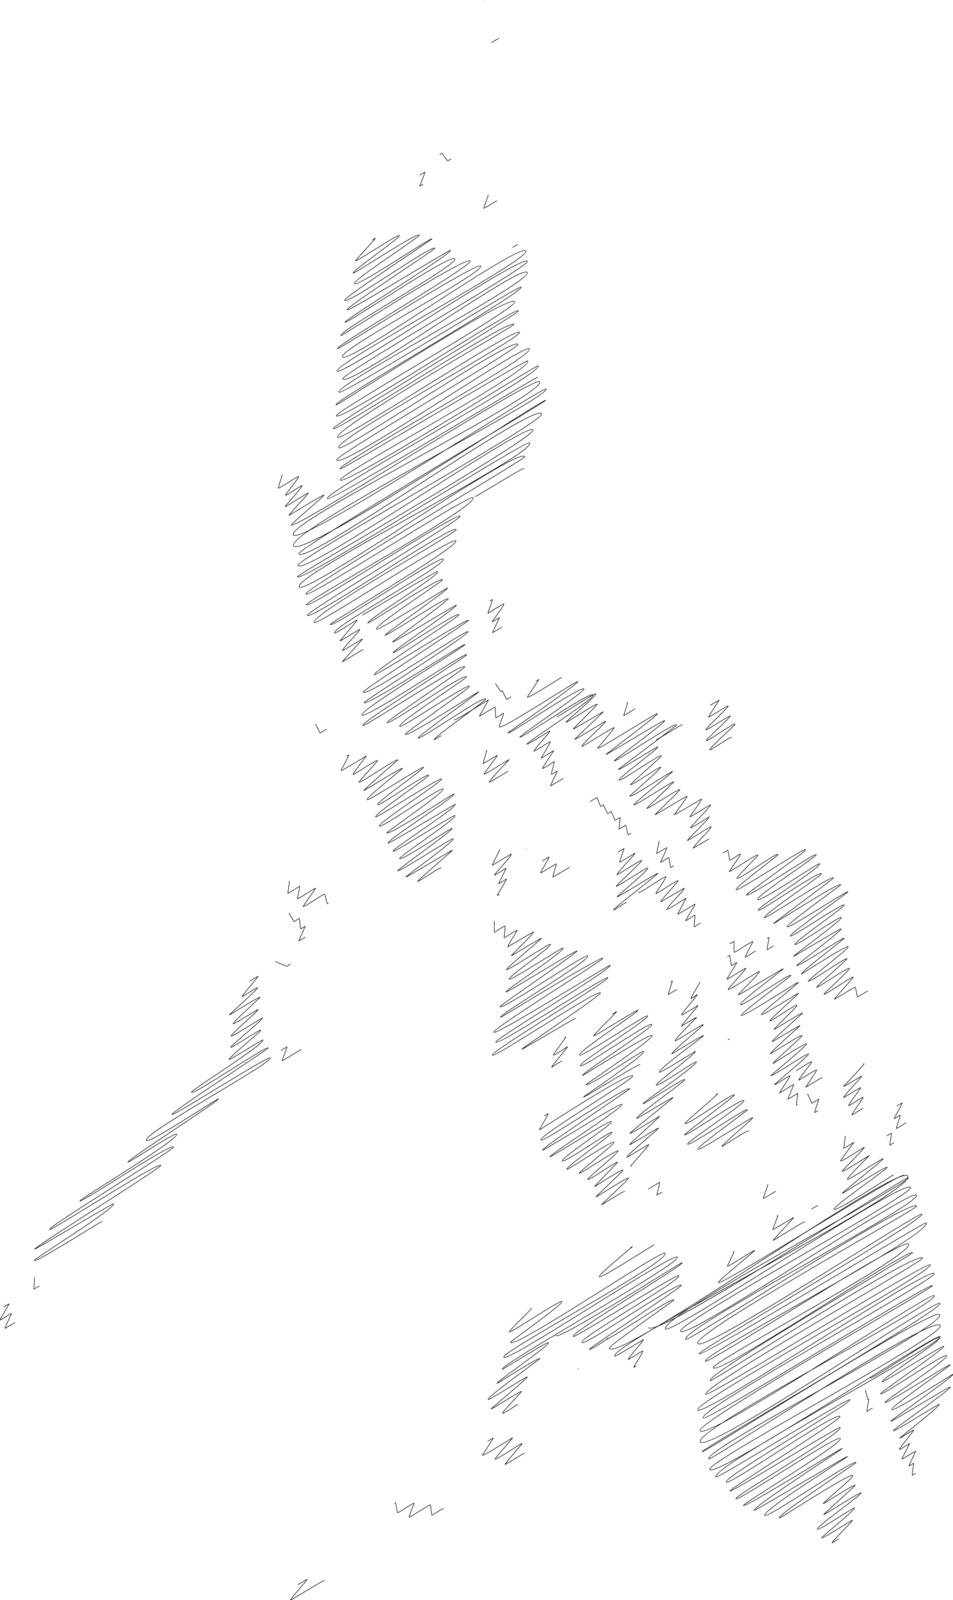 Philippines - pencil scribble sketch silhouette map of country area with dropped shadow. Simple flat vector illustration.